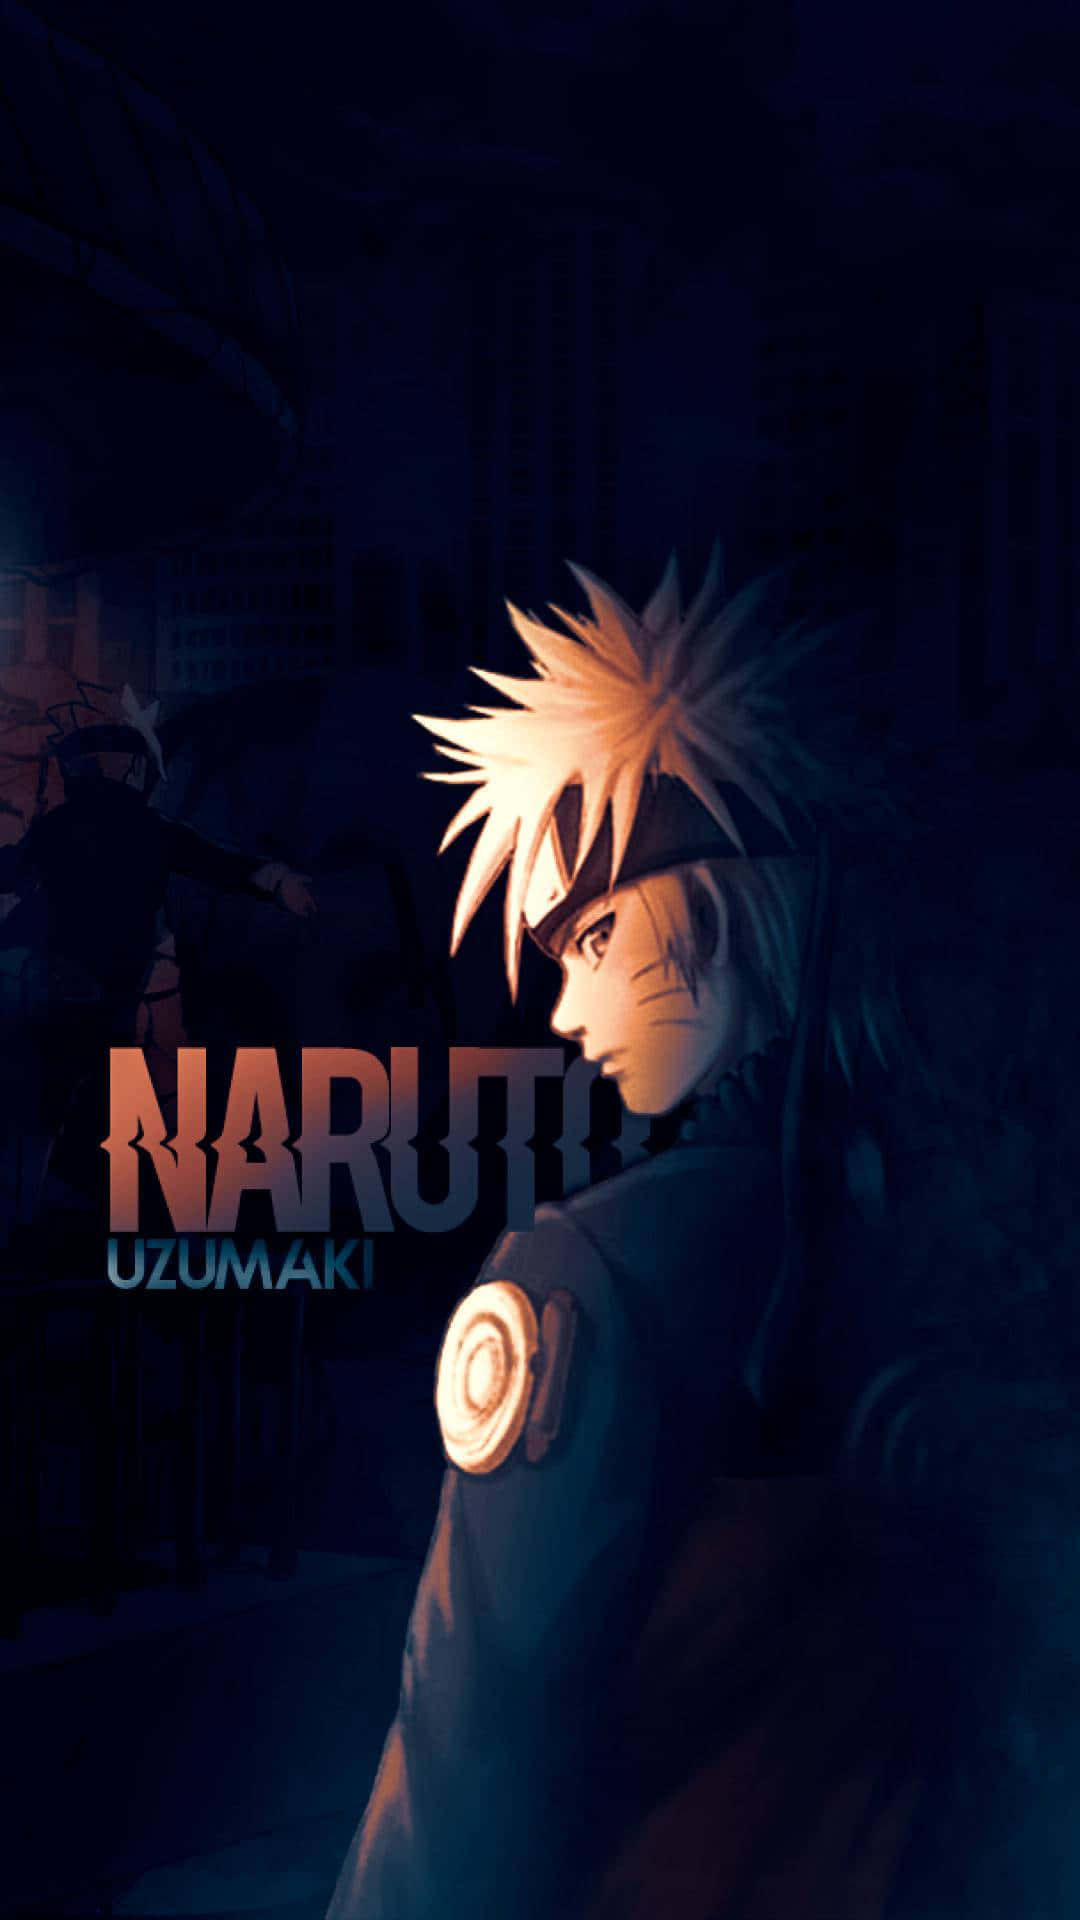 A lonely Naruto embracing his sorrow in solitude Wallpaper